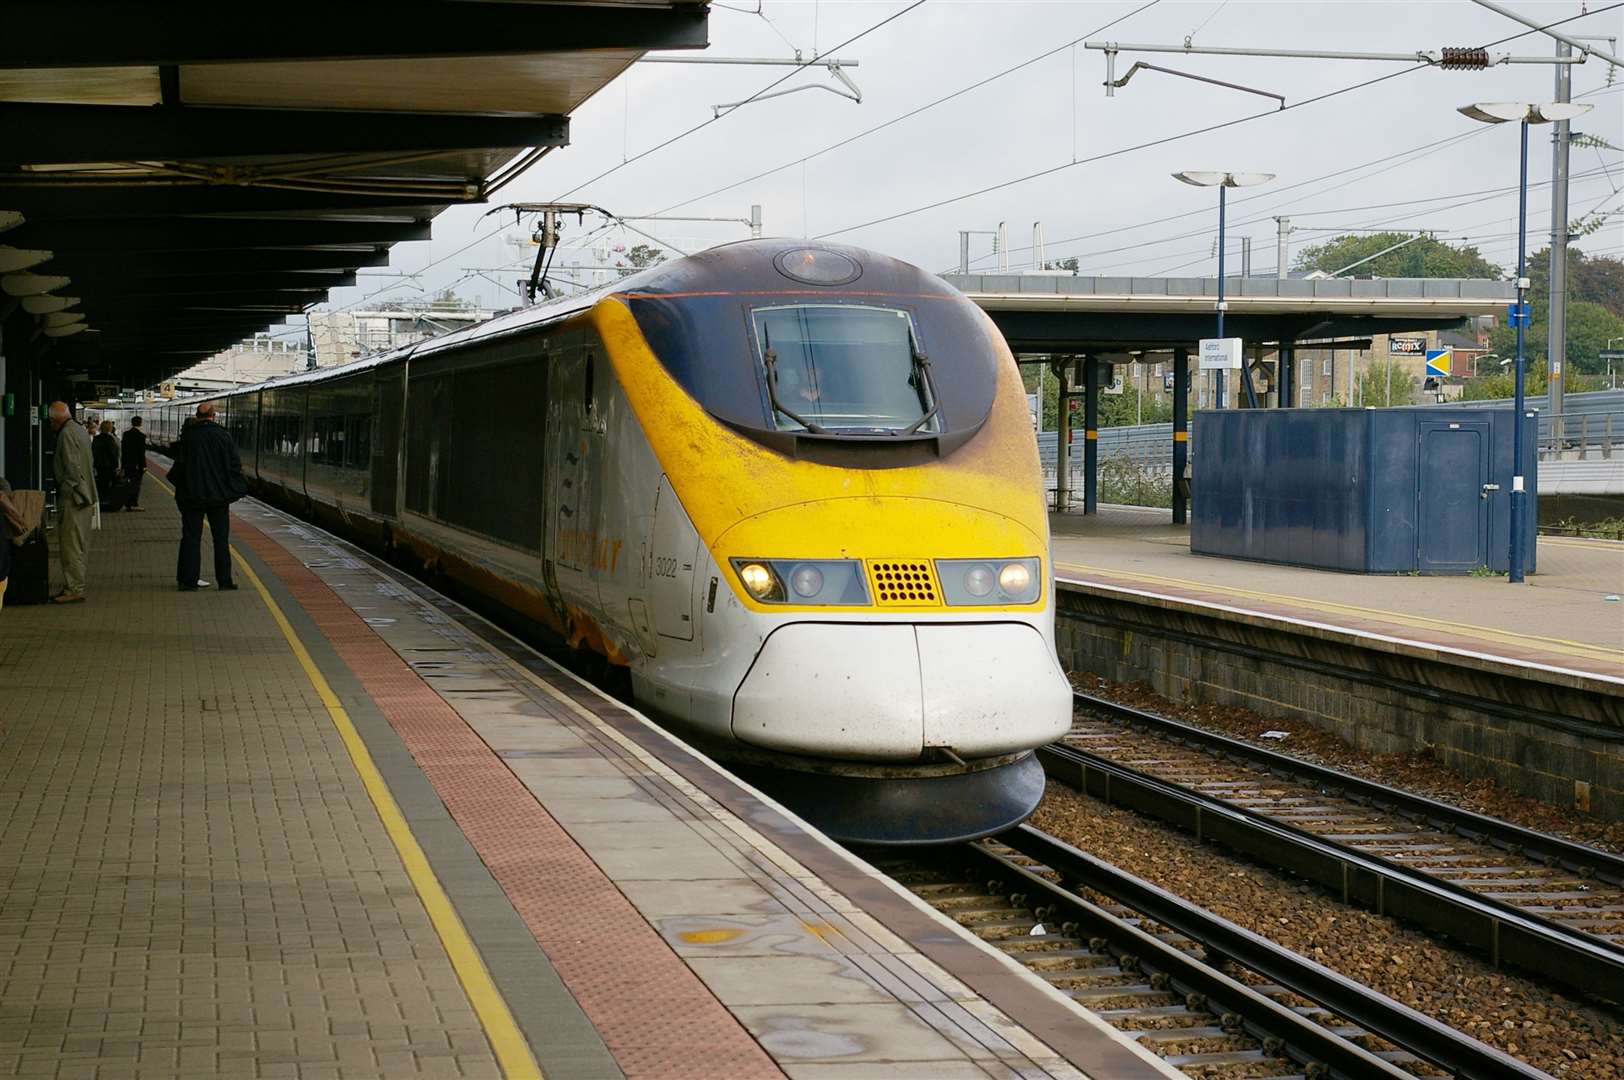 Eurostar trains will not stop at Ebbsfleet or Ashford before 2023 after withdrawing services due to the pandemic